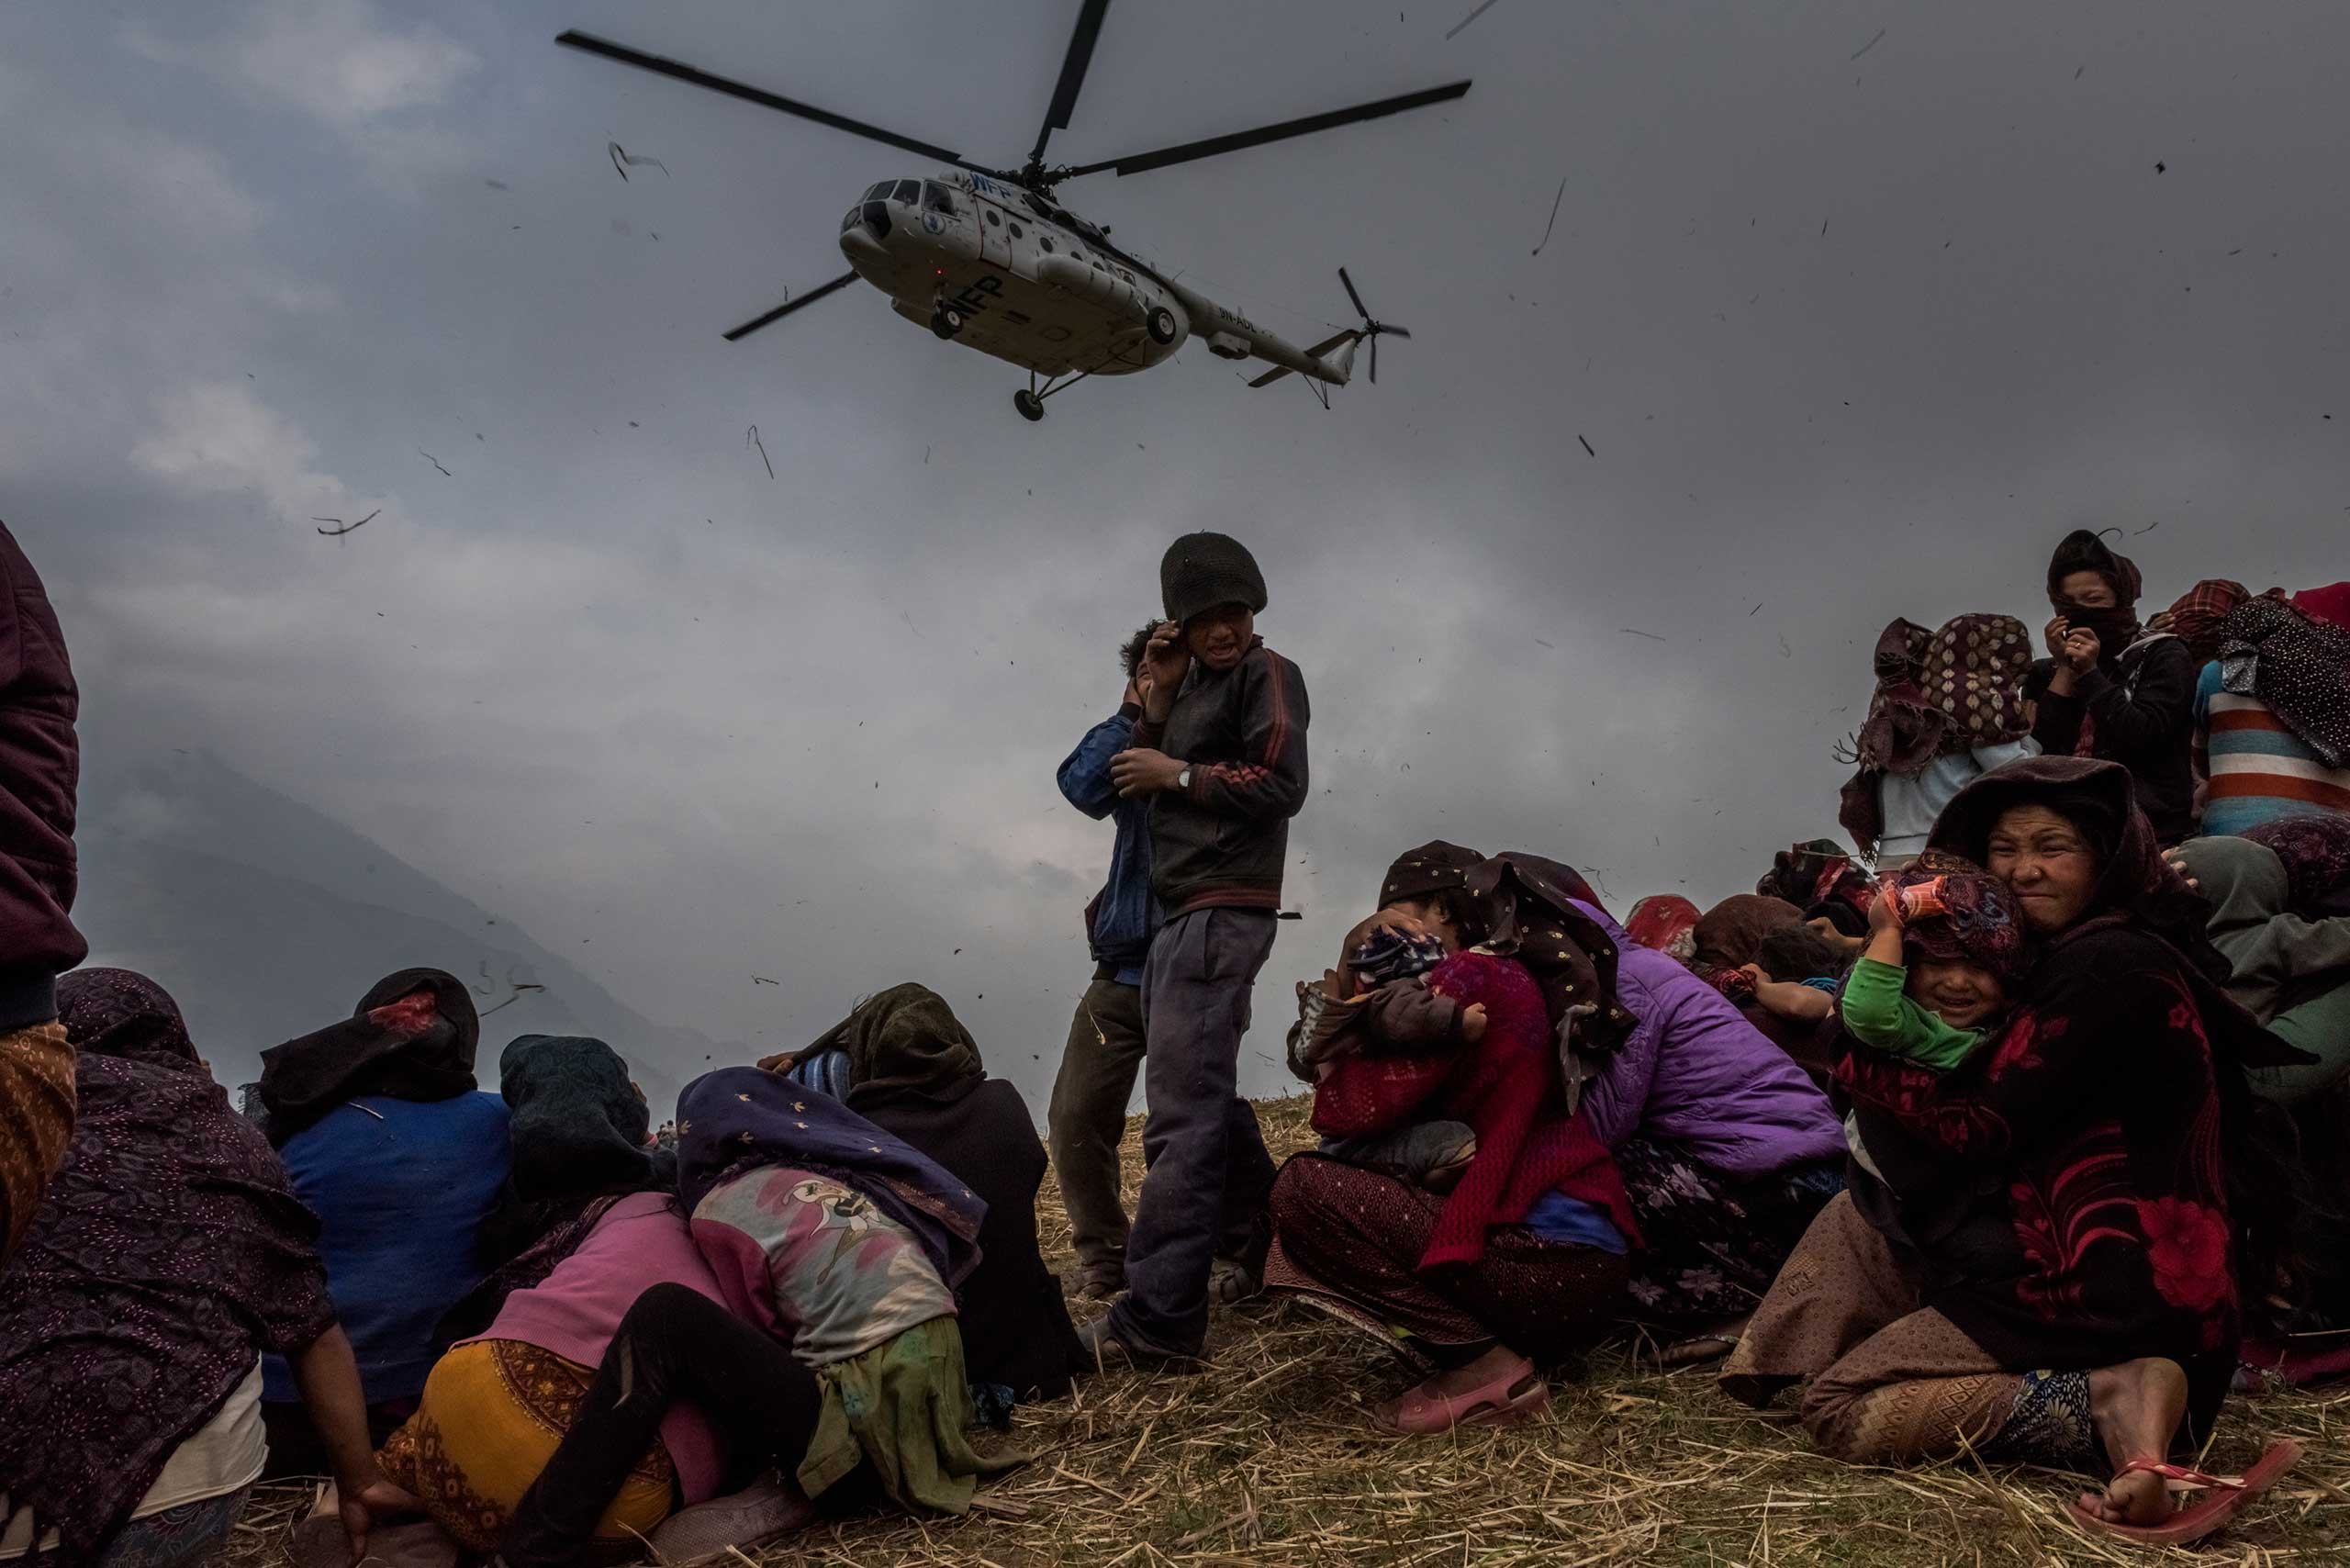 Nepalese villagers turn away from the downdraft of a helicopter delivering relief supplies to Gumda, a remote hillside village in Nepal. The mountainous terrain meant many of the earthquake-affected villages could be reached only by air, or by hours or days on foot. May 9, 2015.